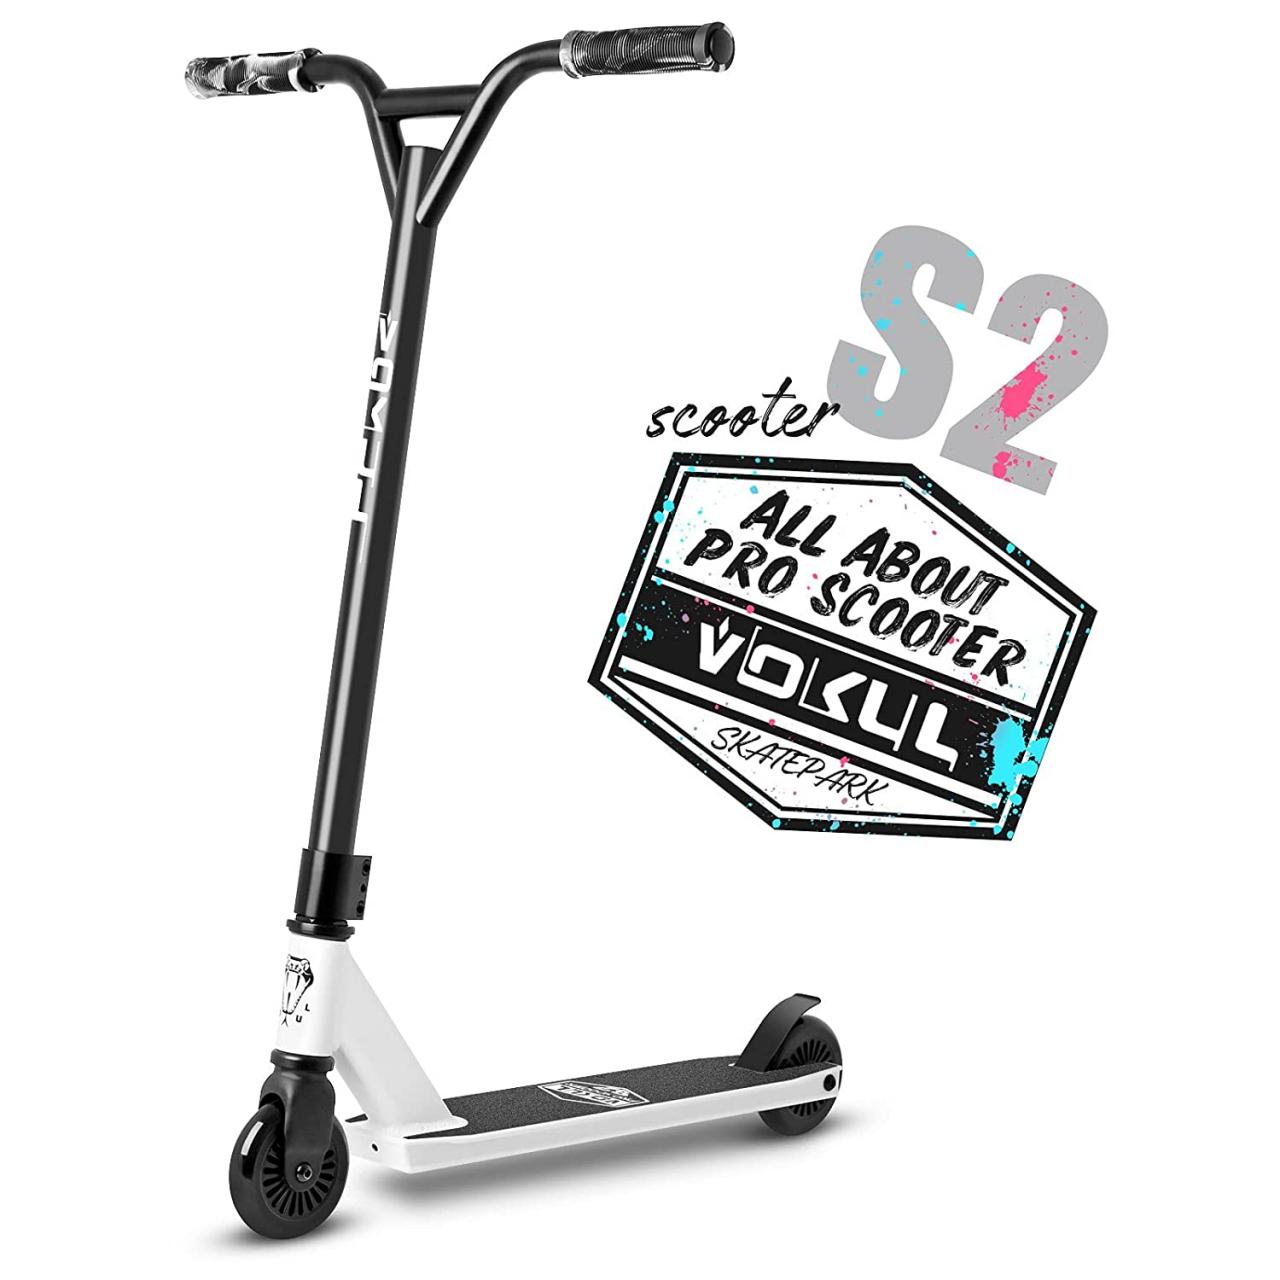 Buy VOKUL S2 Tricks Pro Stunt Scooter with Stable Performance - Best Entry  Level Freestyle Pro Scooter for Age 7 Up Kids,Boys,Girls - CrMo4130  Chromoly Bar - Reinforced 20